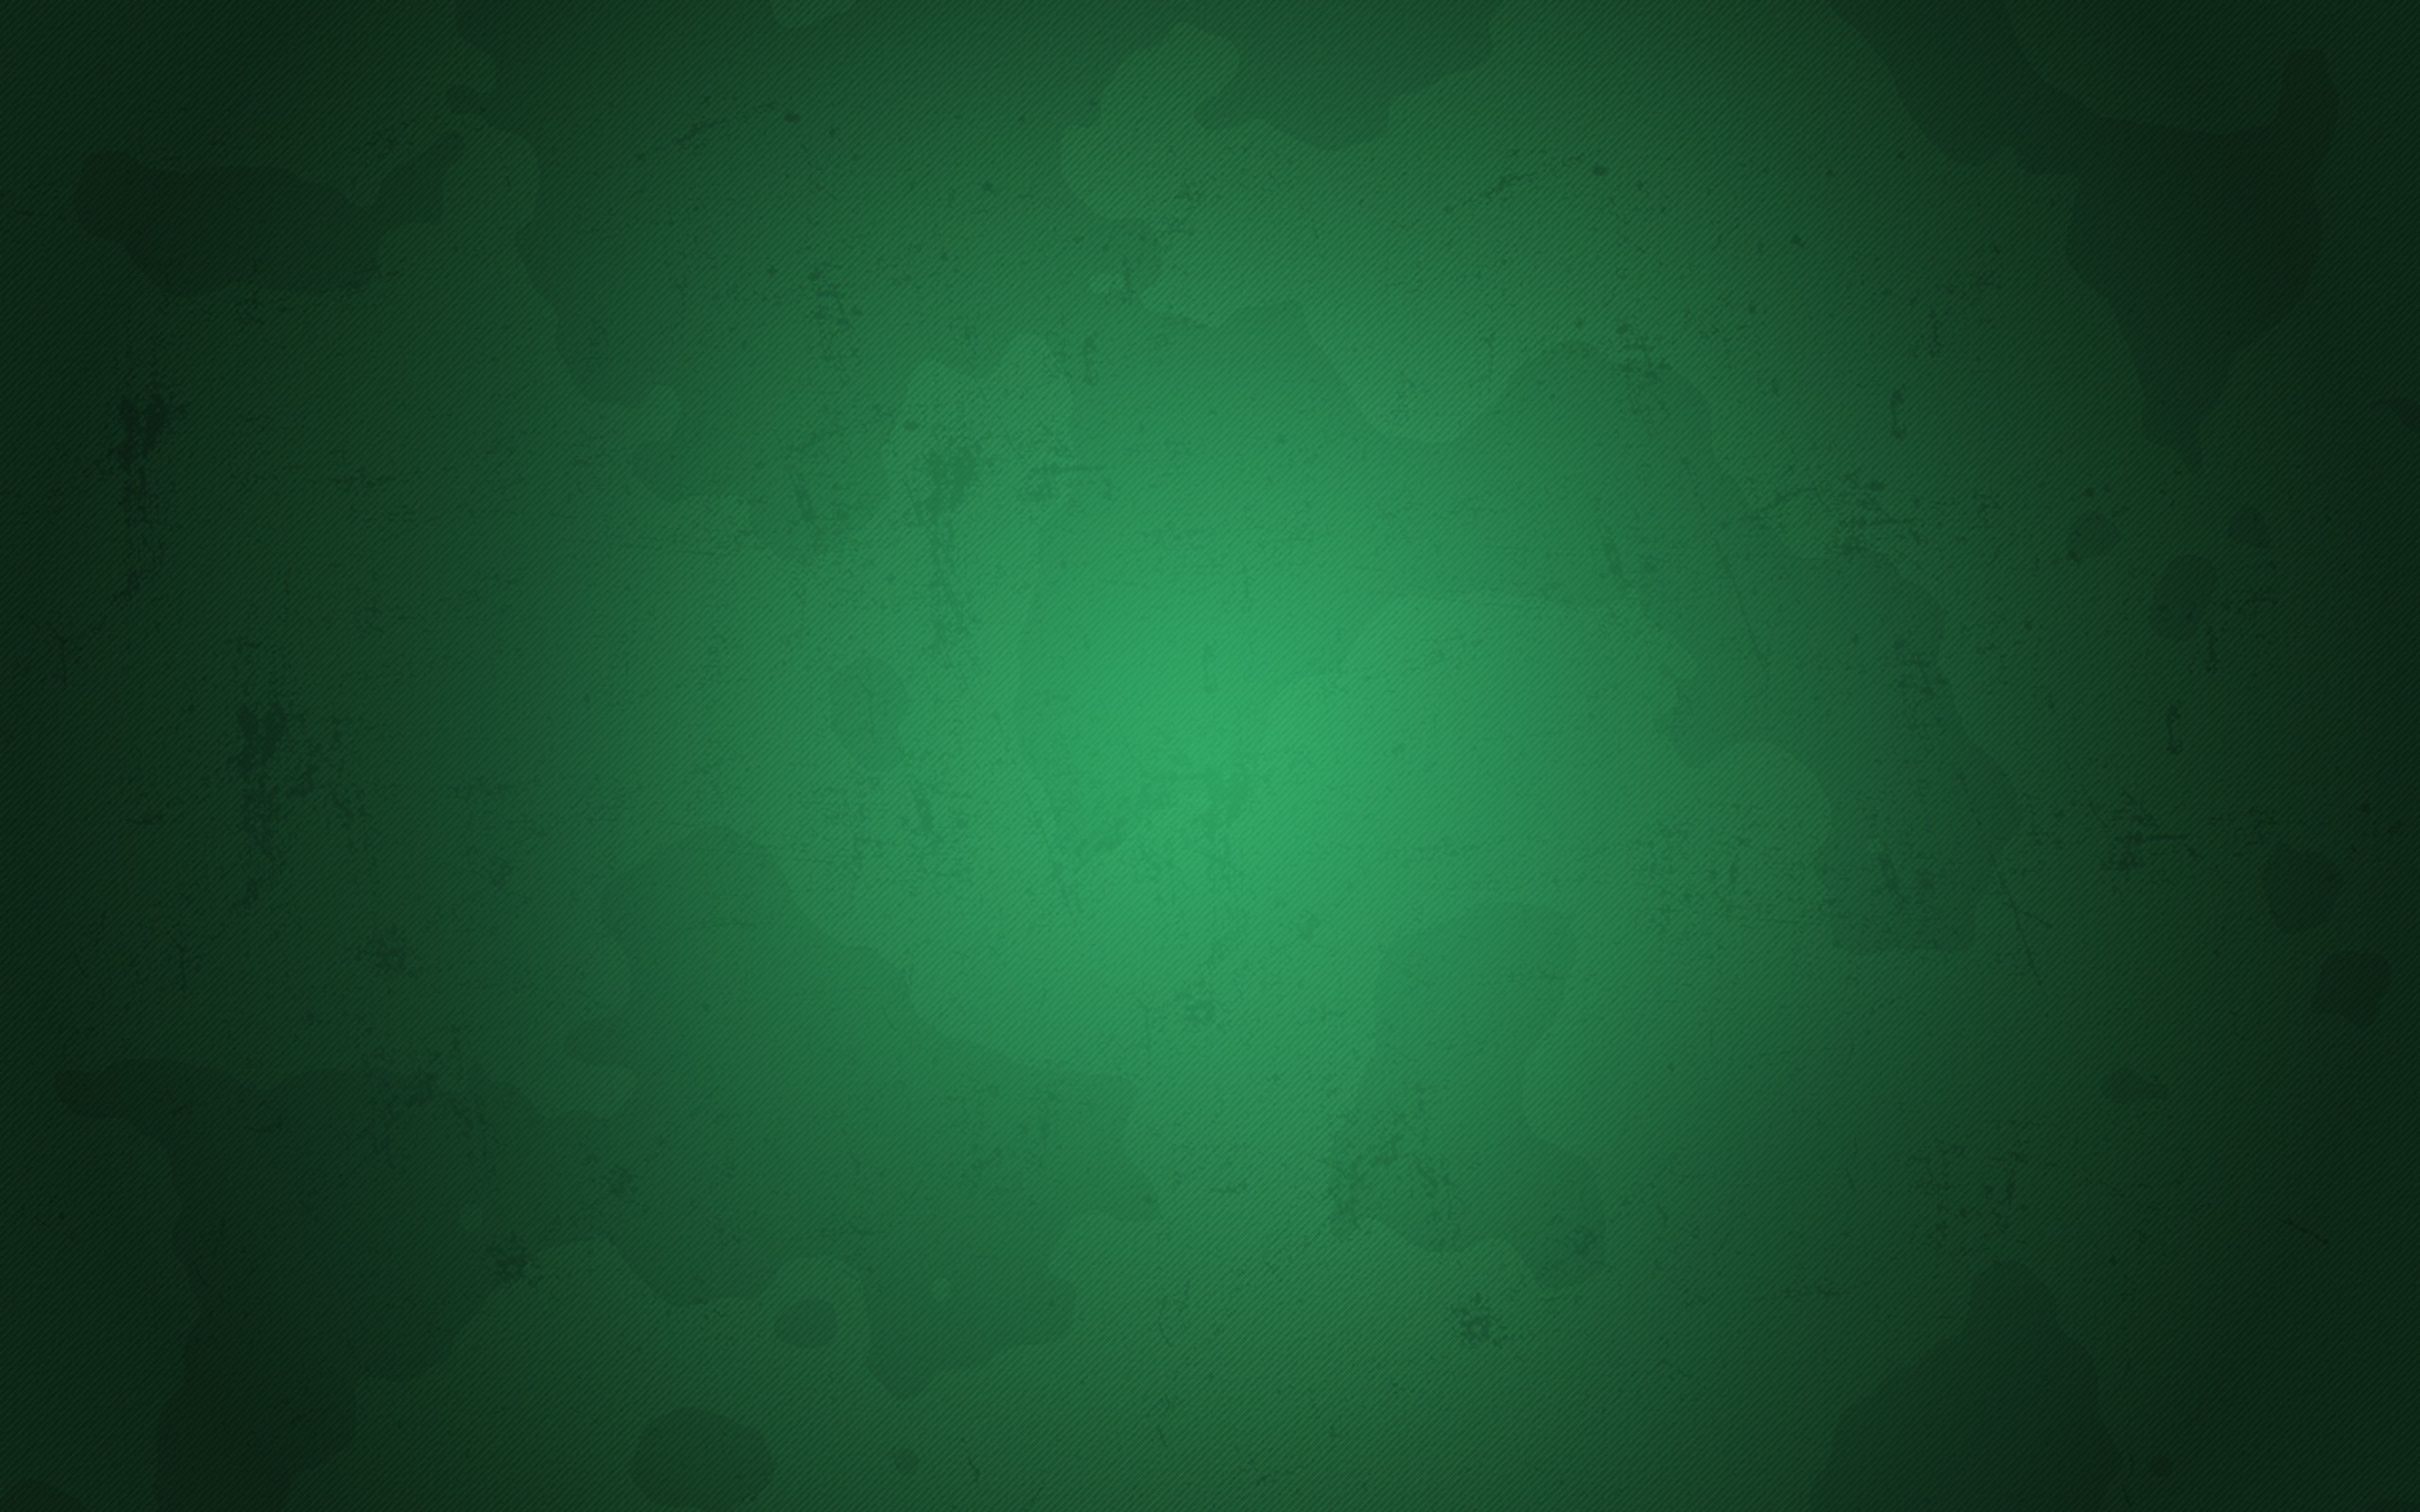 General 2560x1600 green background simple background green texture